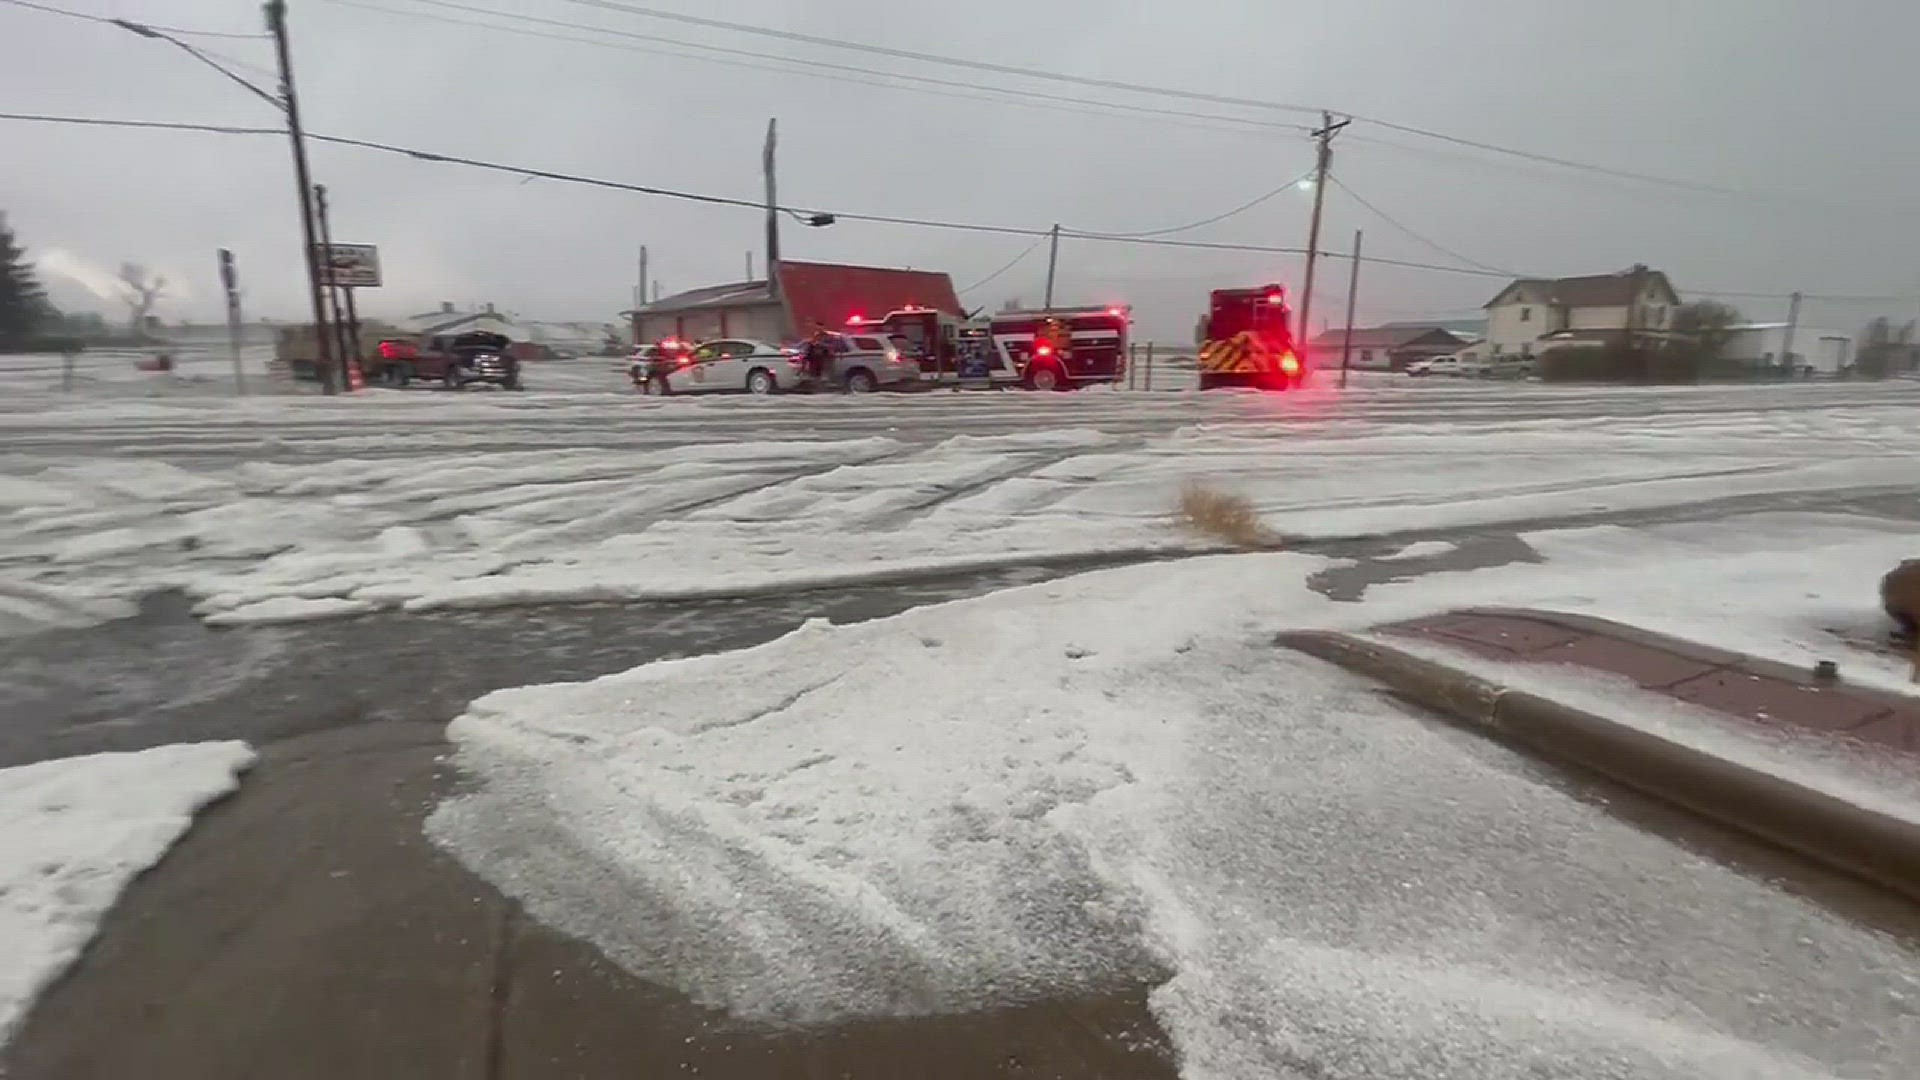 Kelly Reinke took this video of cars taking shelter at a gas station on Wednesday as severe weather rolled through the state.